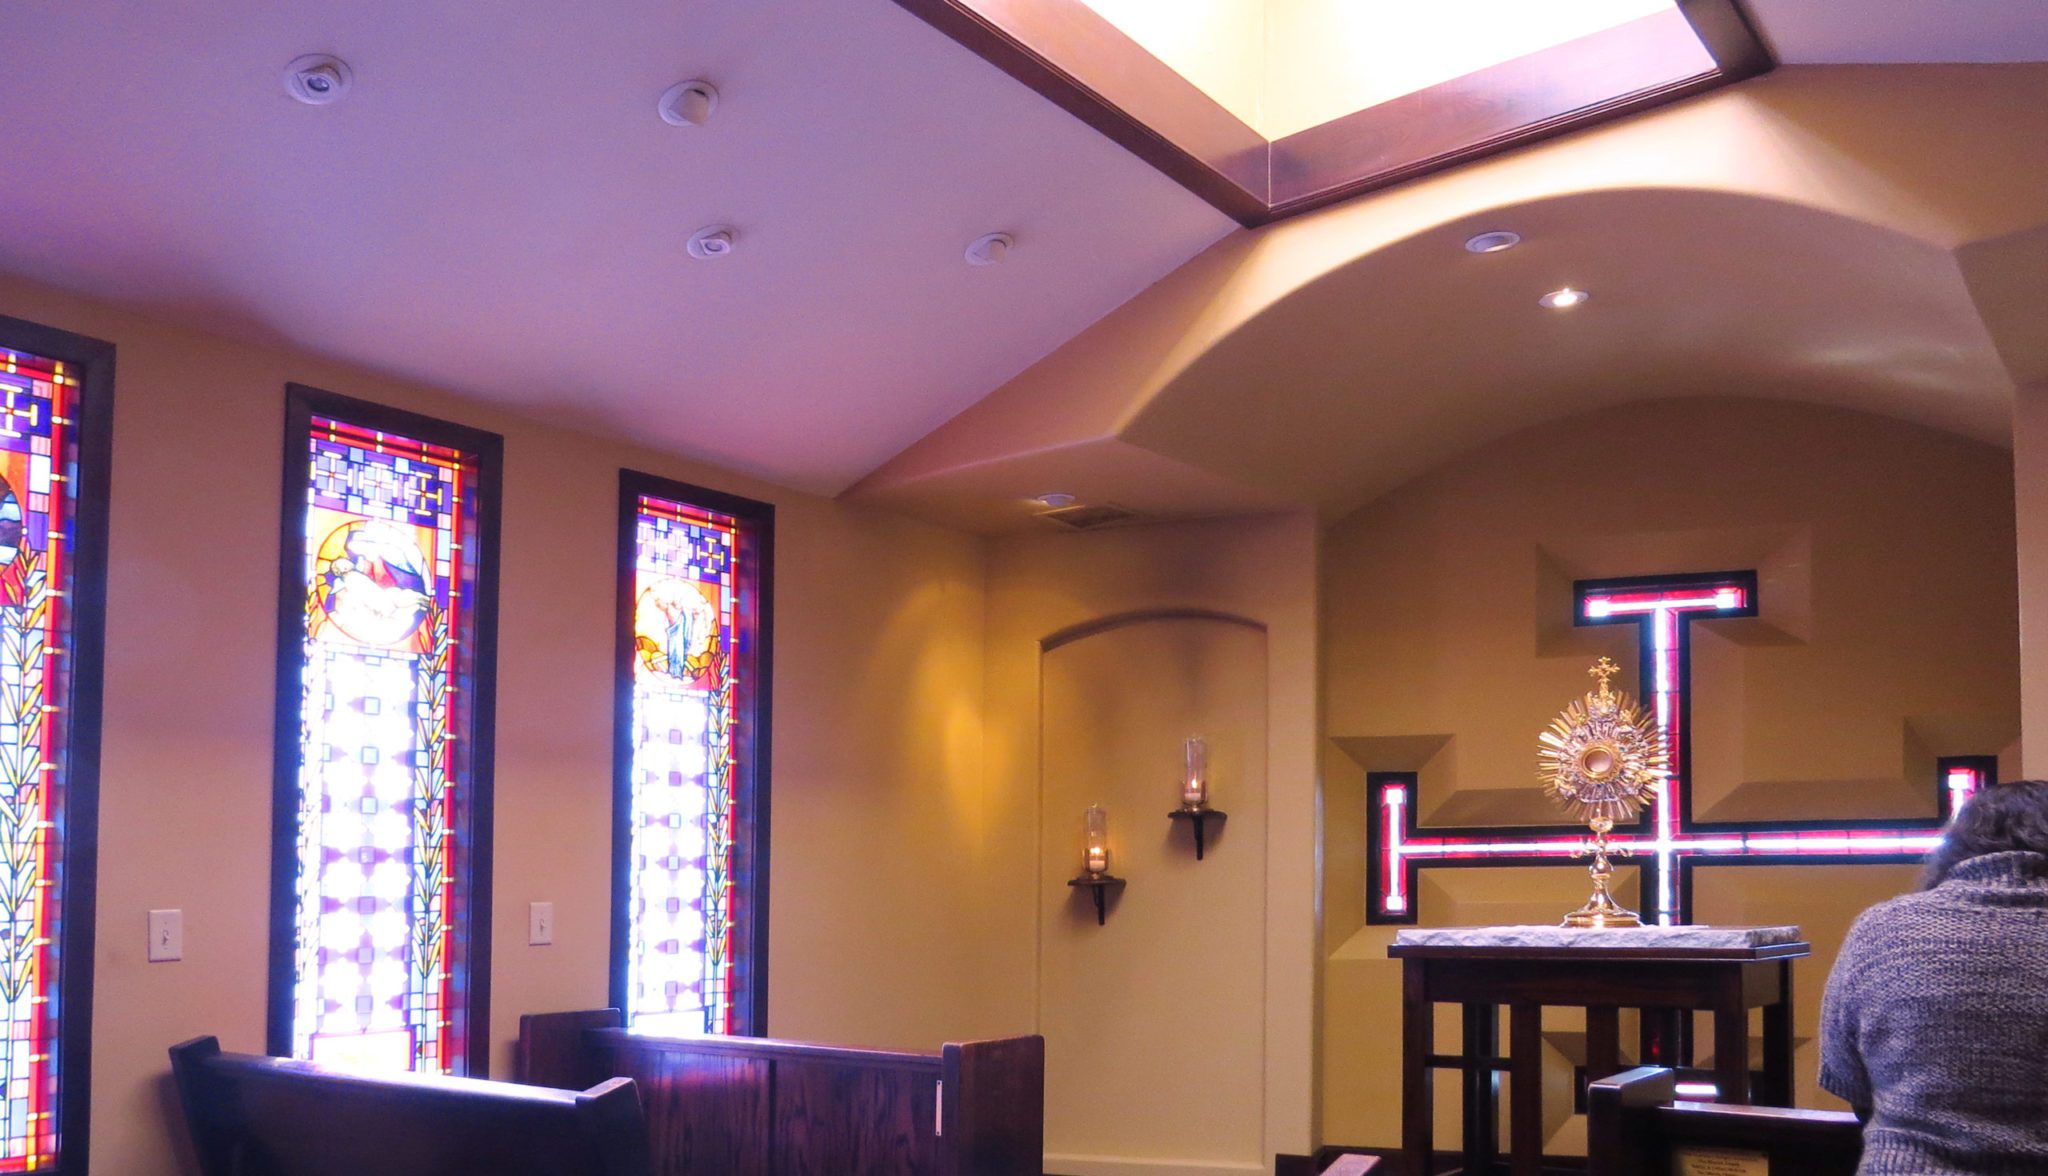 THE LUMEN CHRISTI EUCHARISTIC ADORATION CHAPEL WAS BLESSED AND OPENED FOR USE BY BISHOP J. KEVIN BOLAND ON OCTOBER 12, 2007.